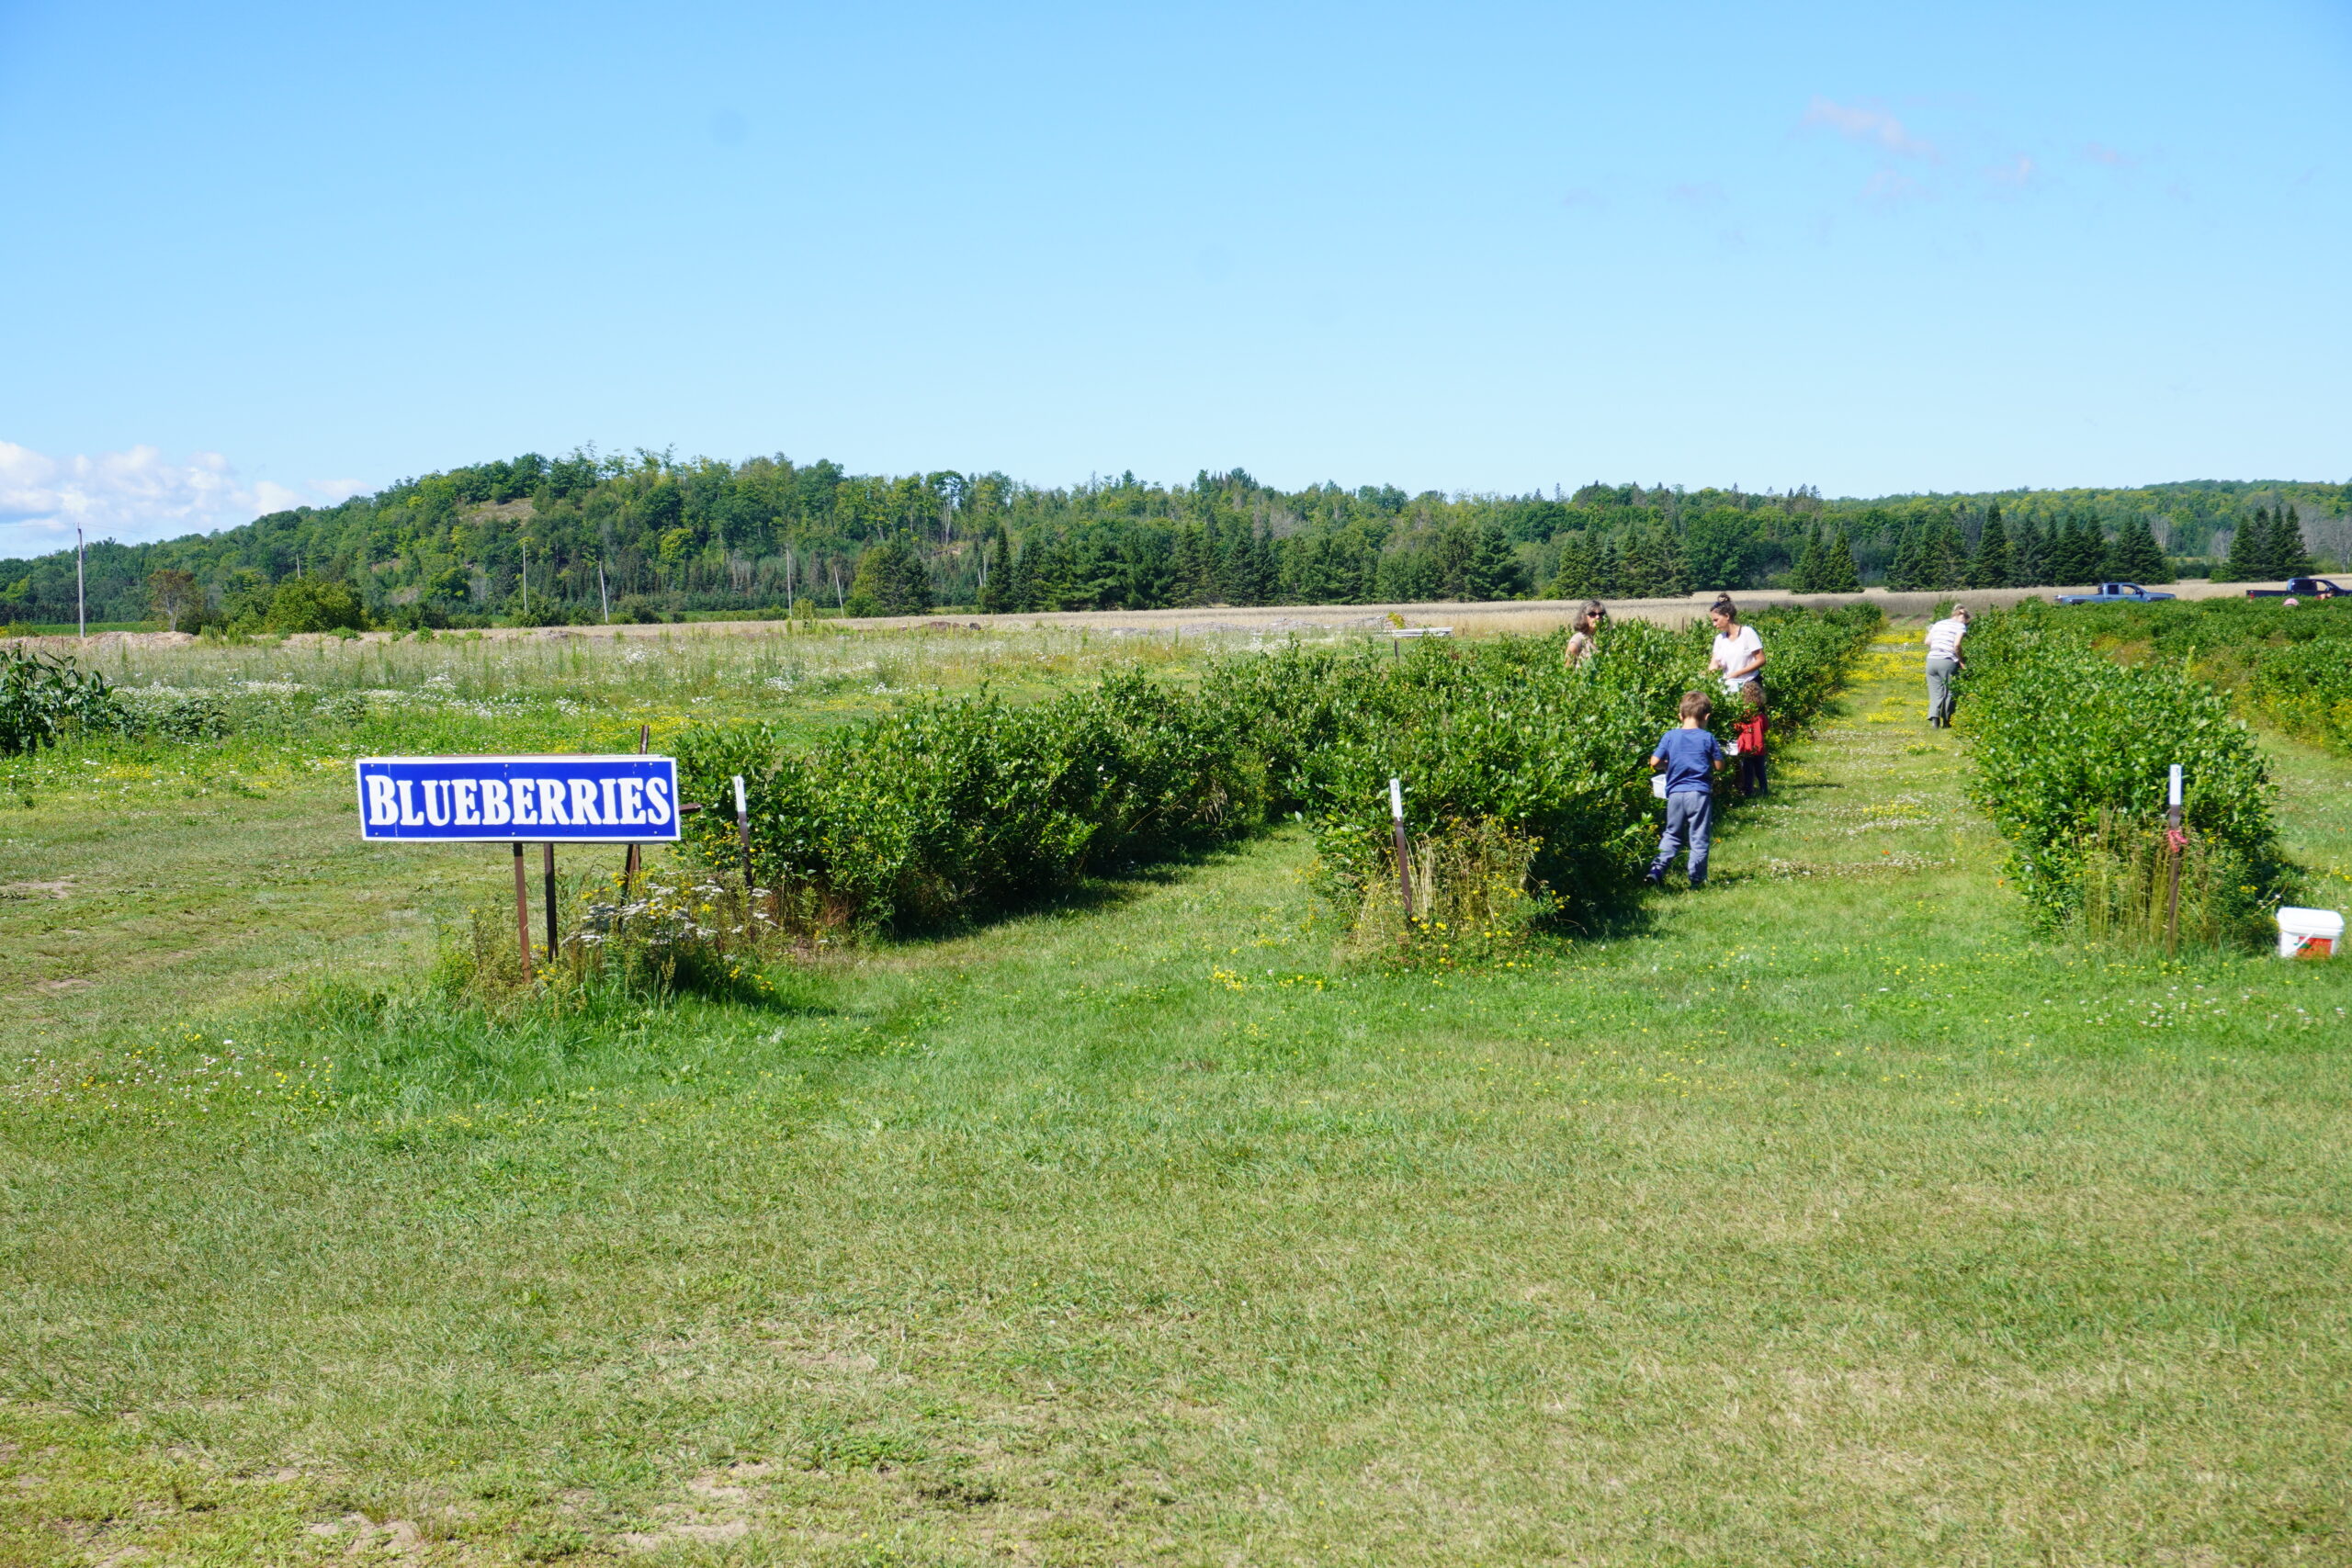 landscape shot of a field with visitors picking berries, a sign reads 'Blueberries' on the right side